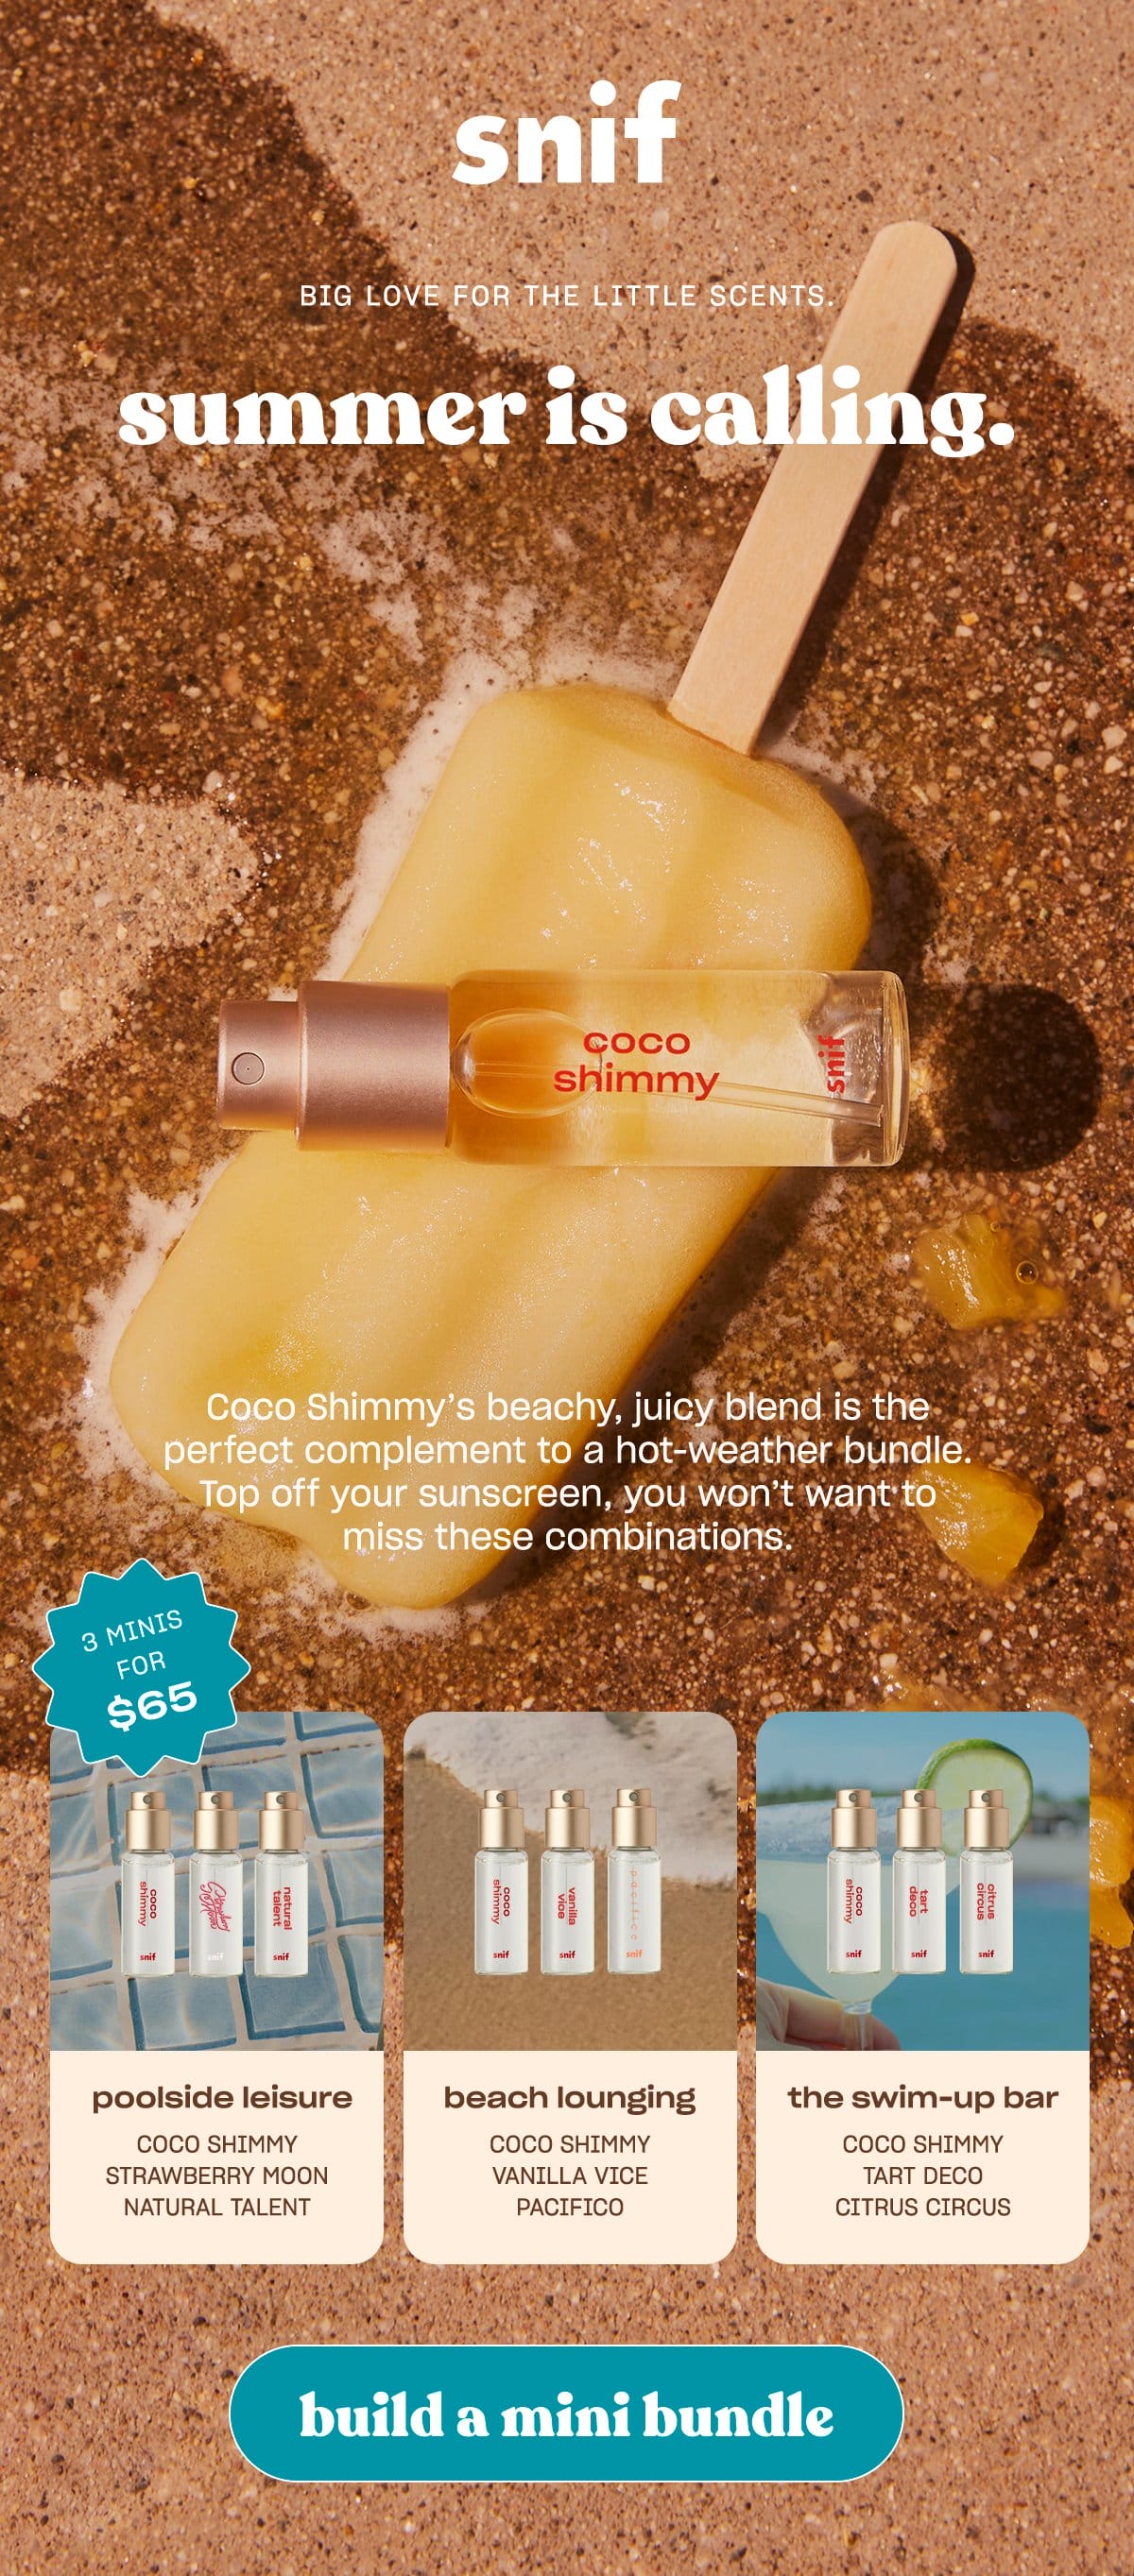 “Coco Shimmy’s beachy, juicy blend is the perfect complement to a hot-weather bundle. Top off your sunscreen, you won’t want to miss these combinations. [build a mini bundle]